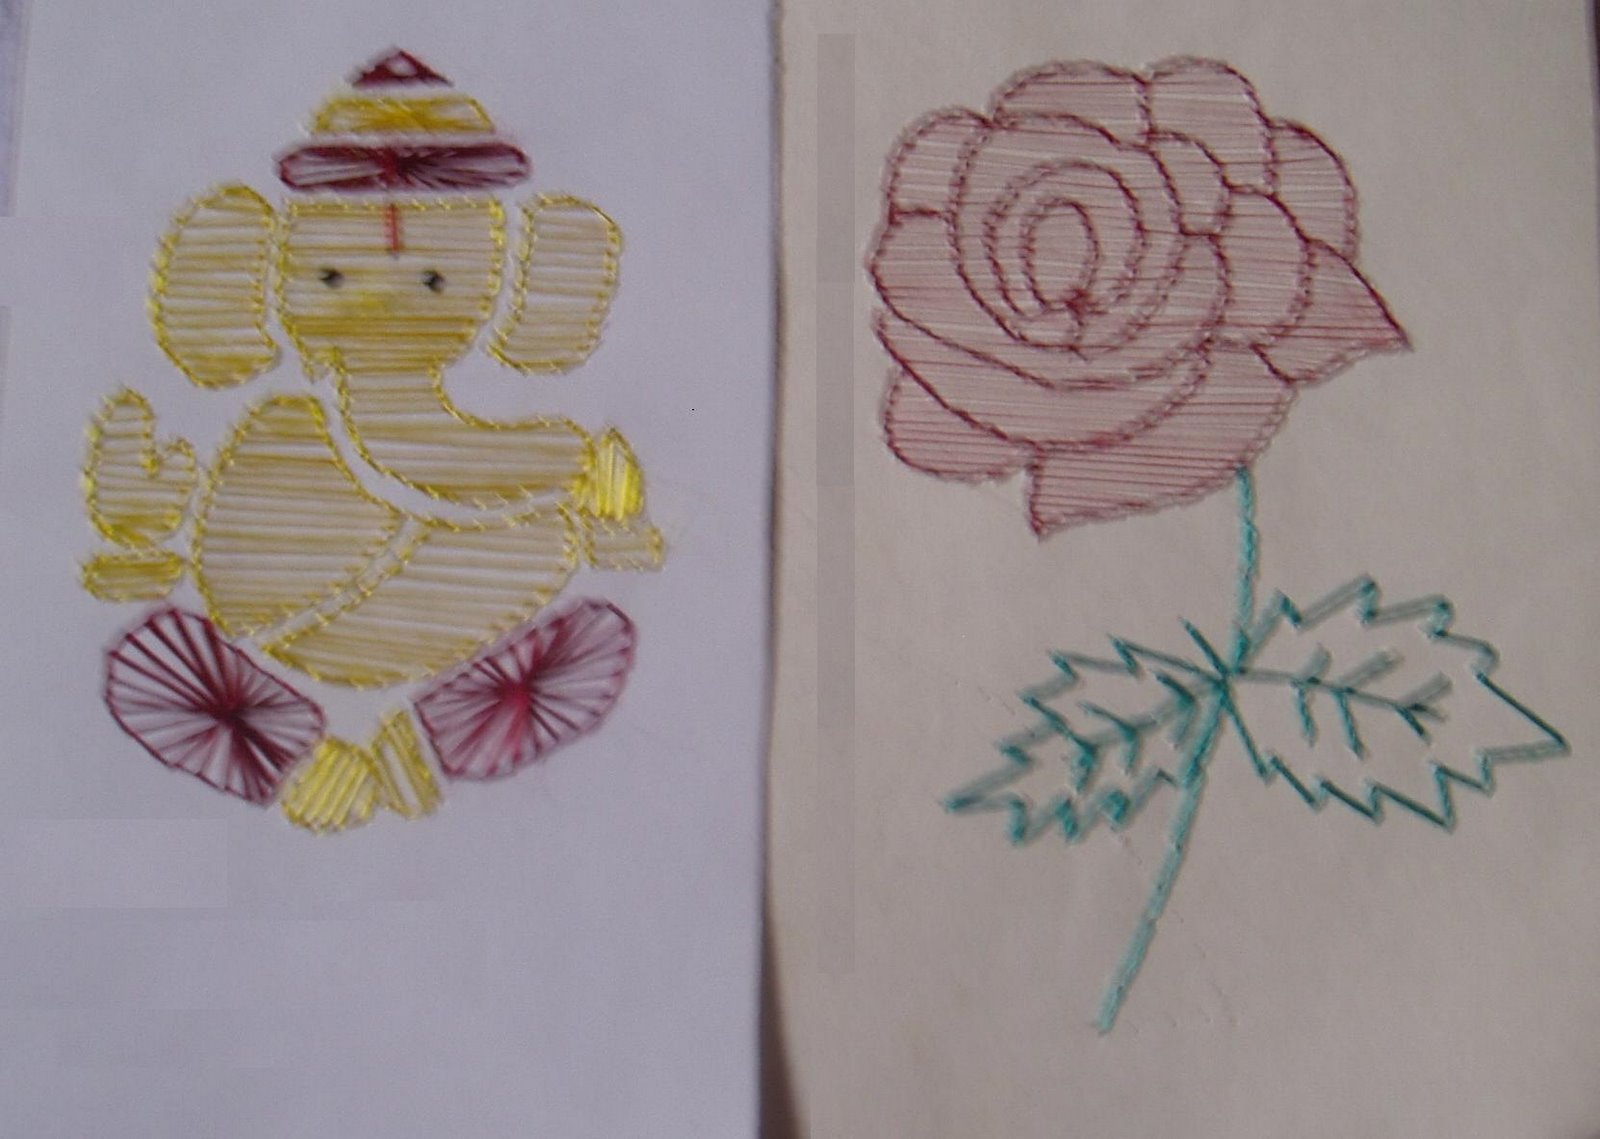 Card Embroidery Patterns Easy Crafts Explore Your Creativity More Card Embroidery Patterns